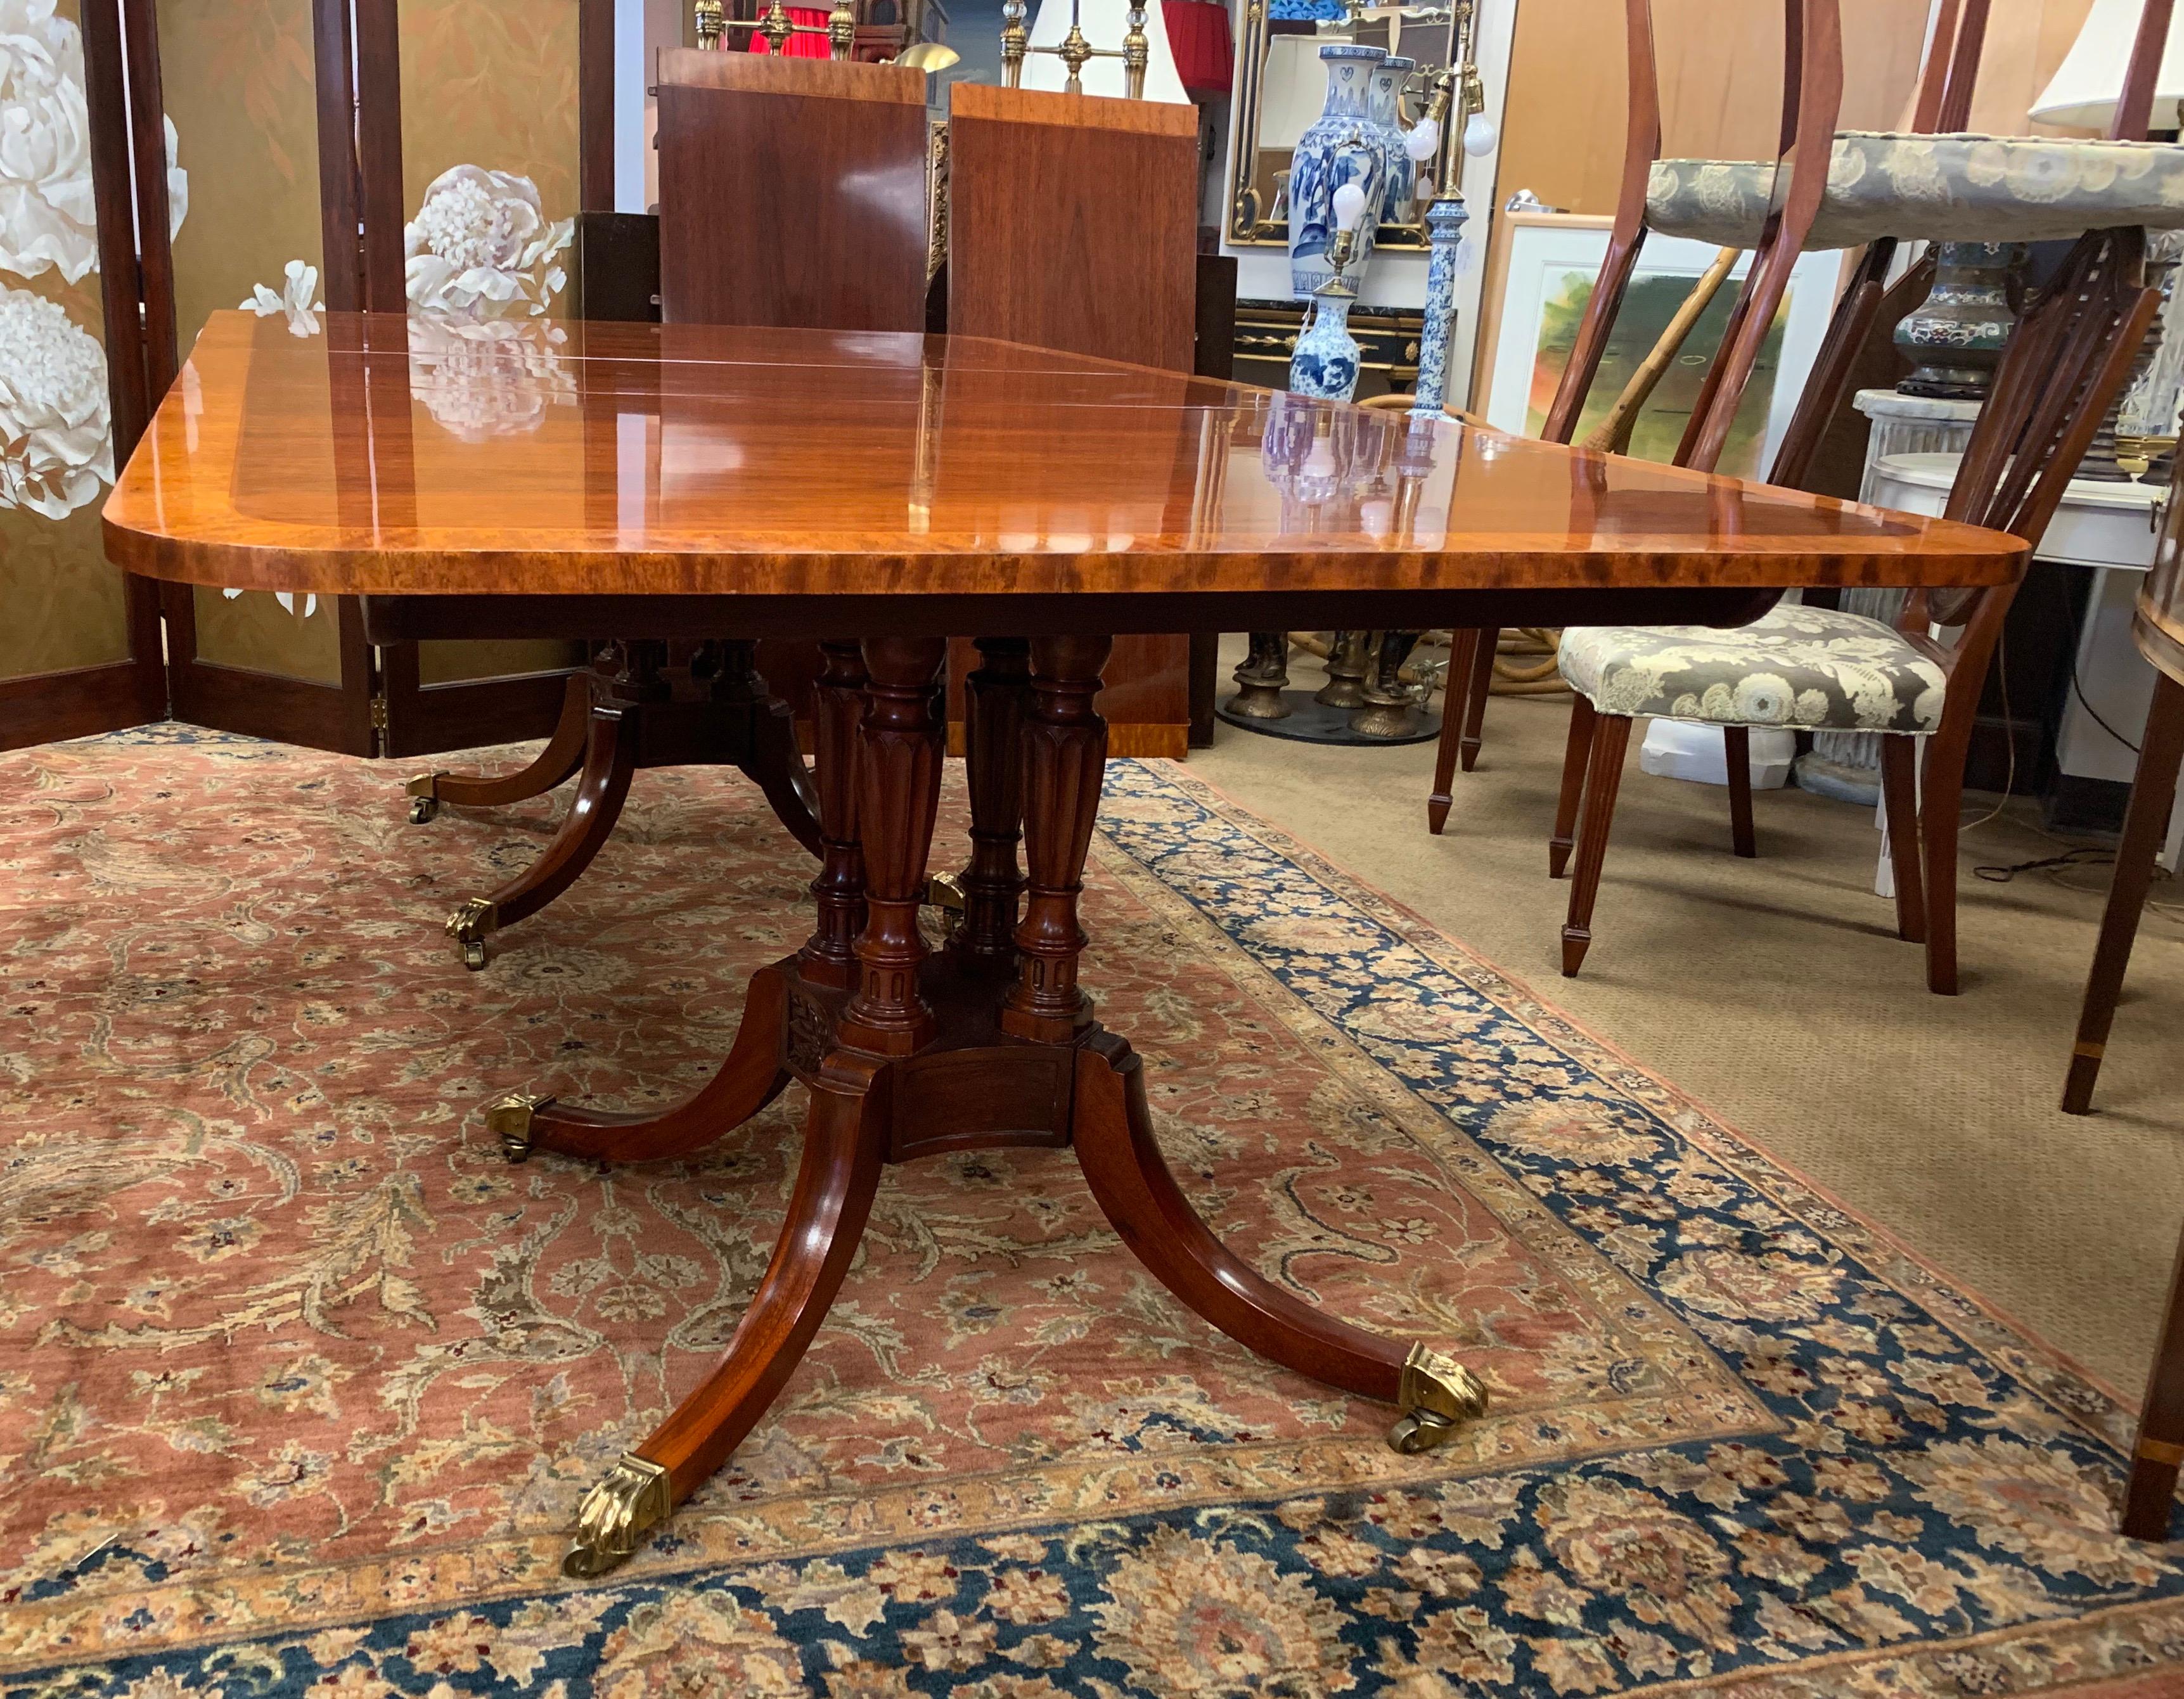 Stunning Baker Furniture mahogany double pedestal dining table features a banded satinwood inlay all around and four turned columns that are supported by a square base with four saber legs that curve outward with brass feet on casters. Comes with